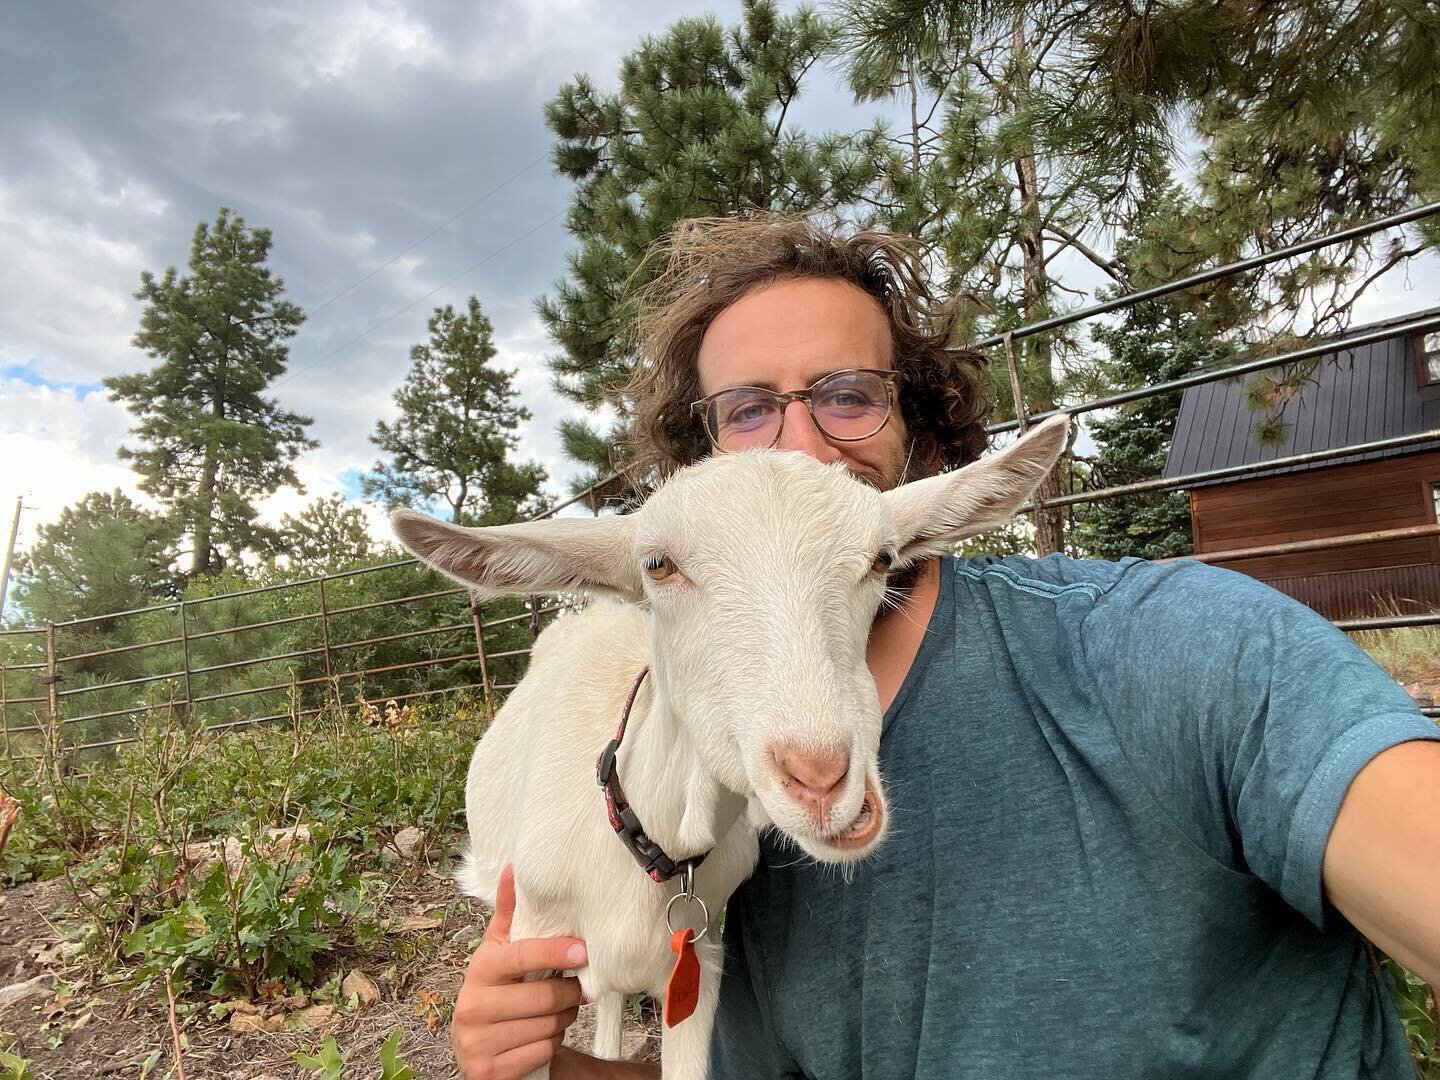 Everyone, meet Dewey. He&rsquo;s a sweet goat that loves people. His best friend is Pep&eacute; (soon to be featured). He loves flowers, nibbling on fingers, and enjoys long walks around the pasture.